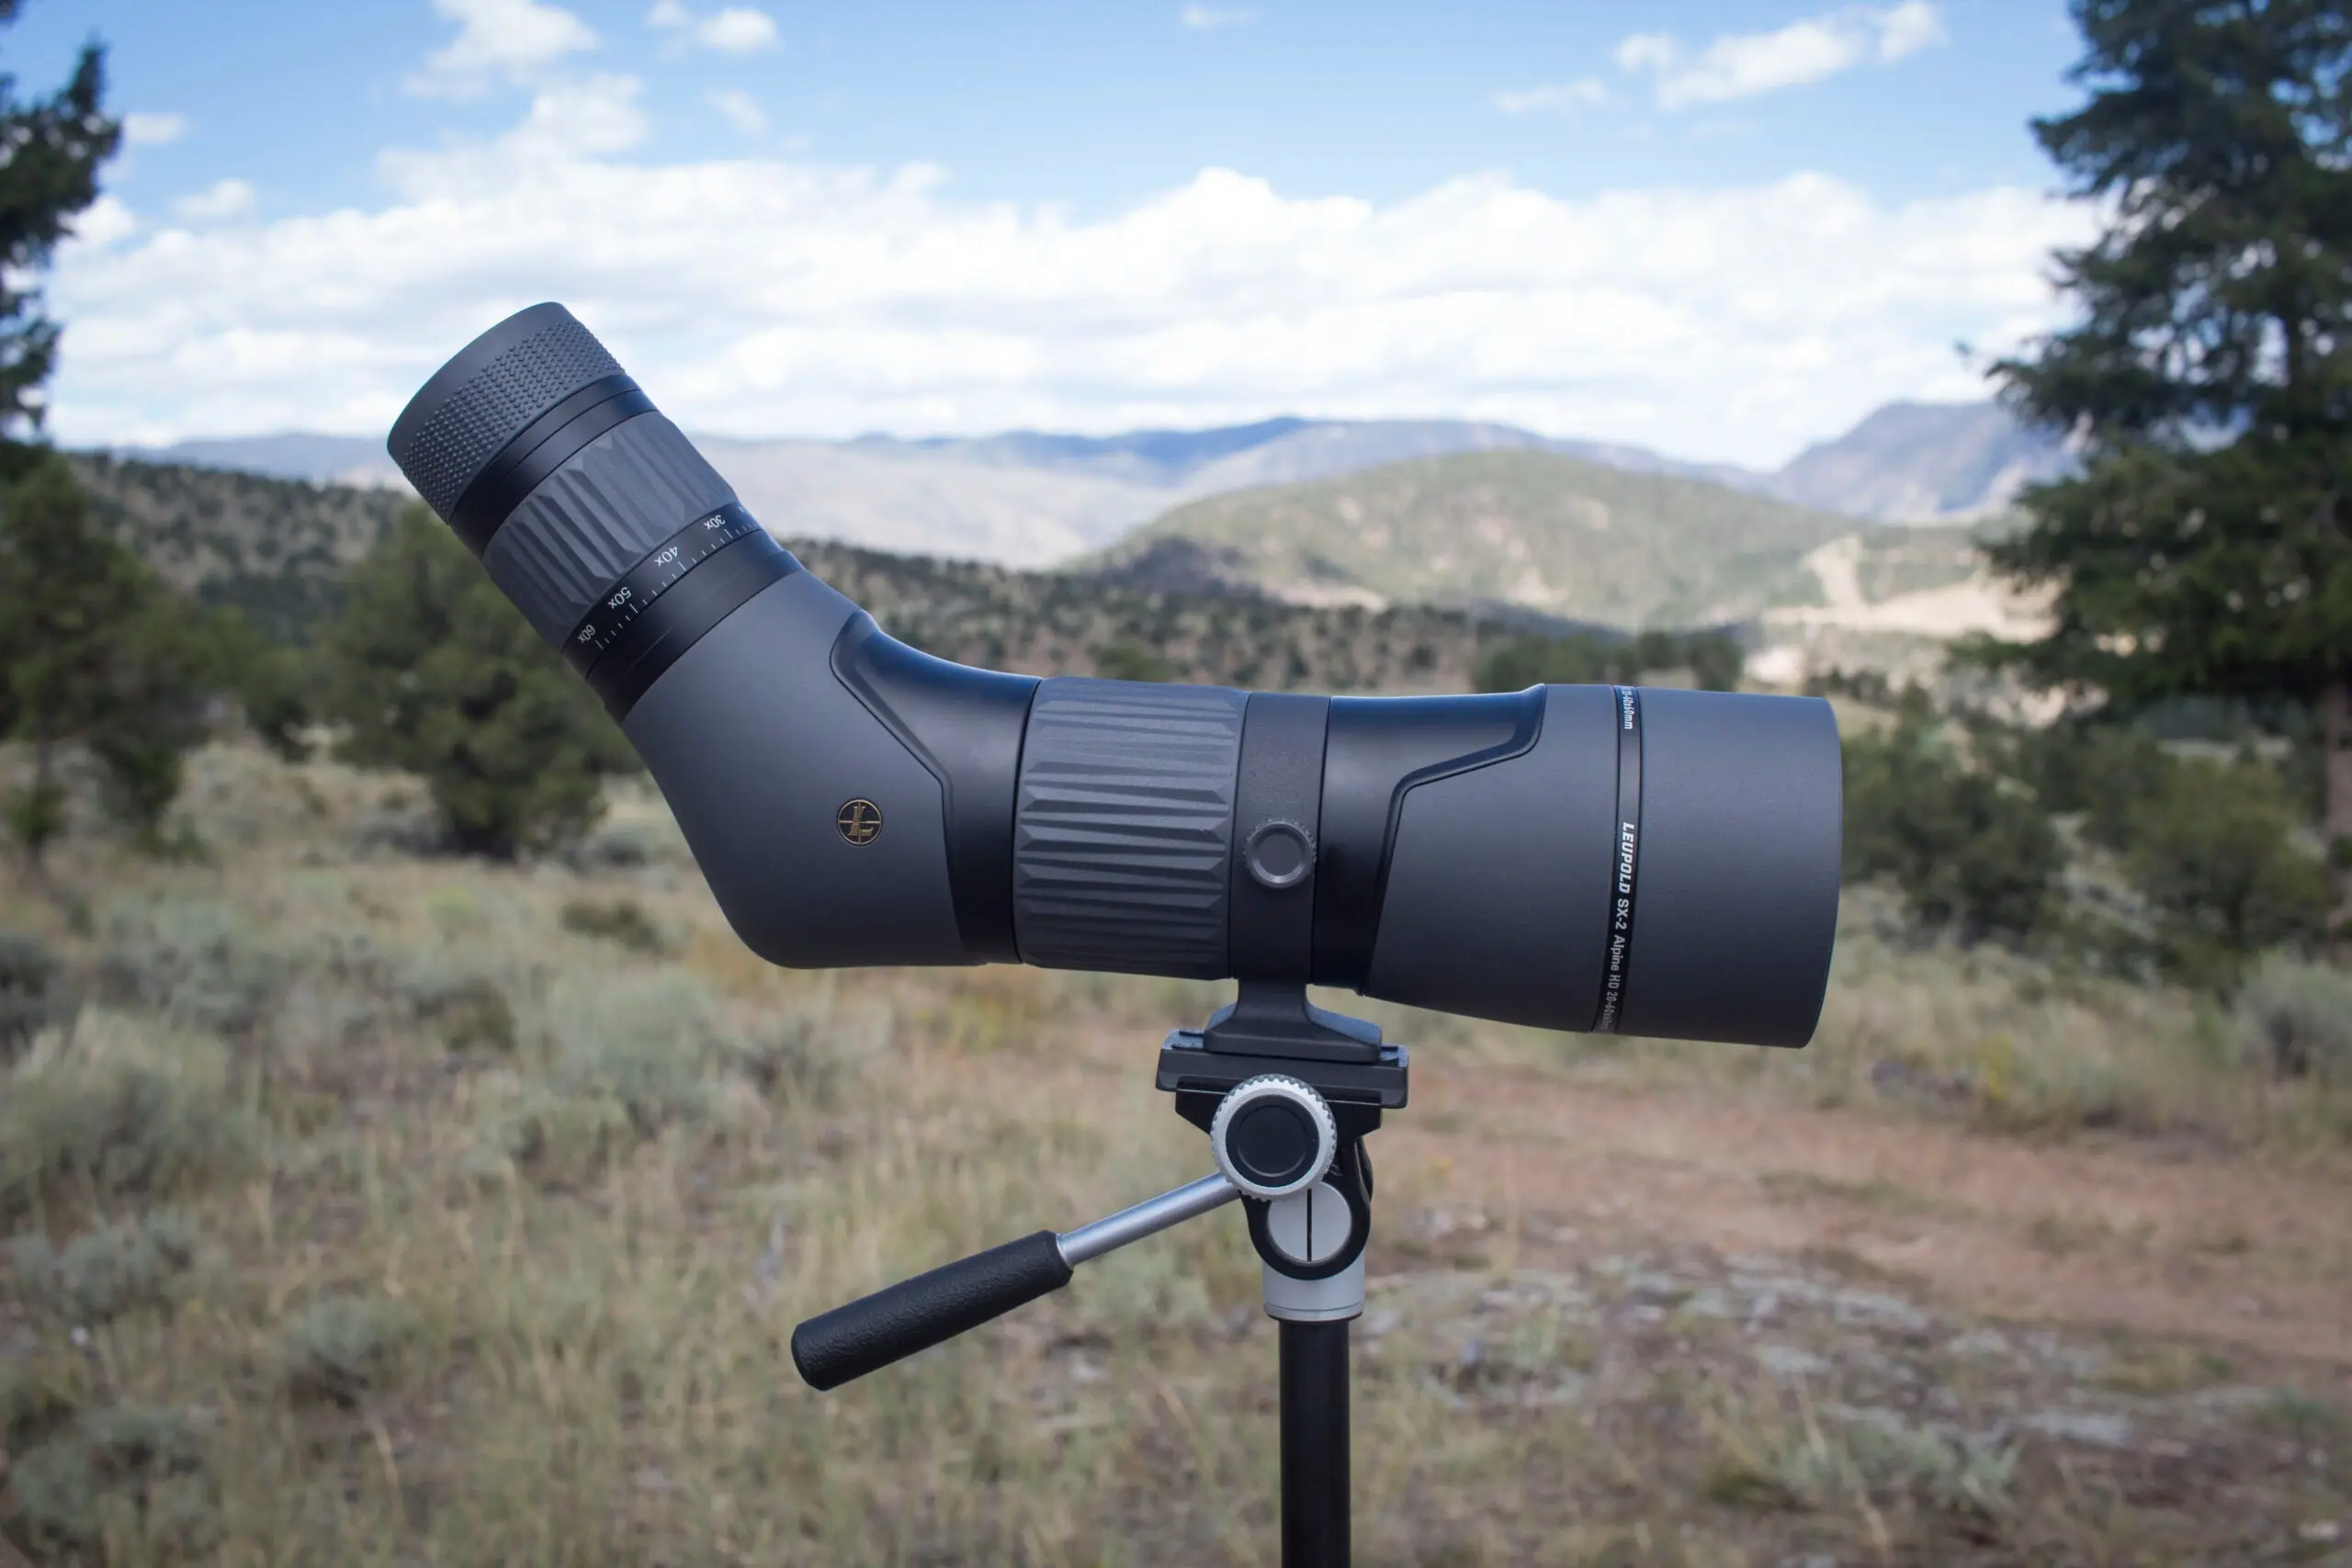 Leupold SX-2 Alpine spotting scope on tripod with mountains in the background